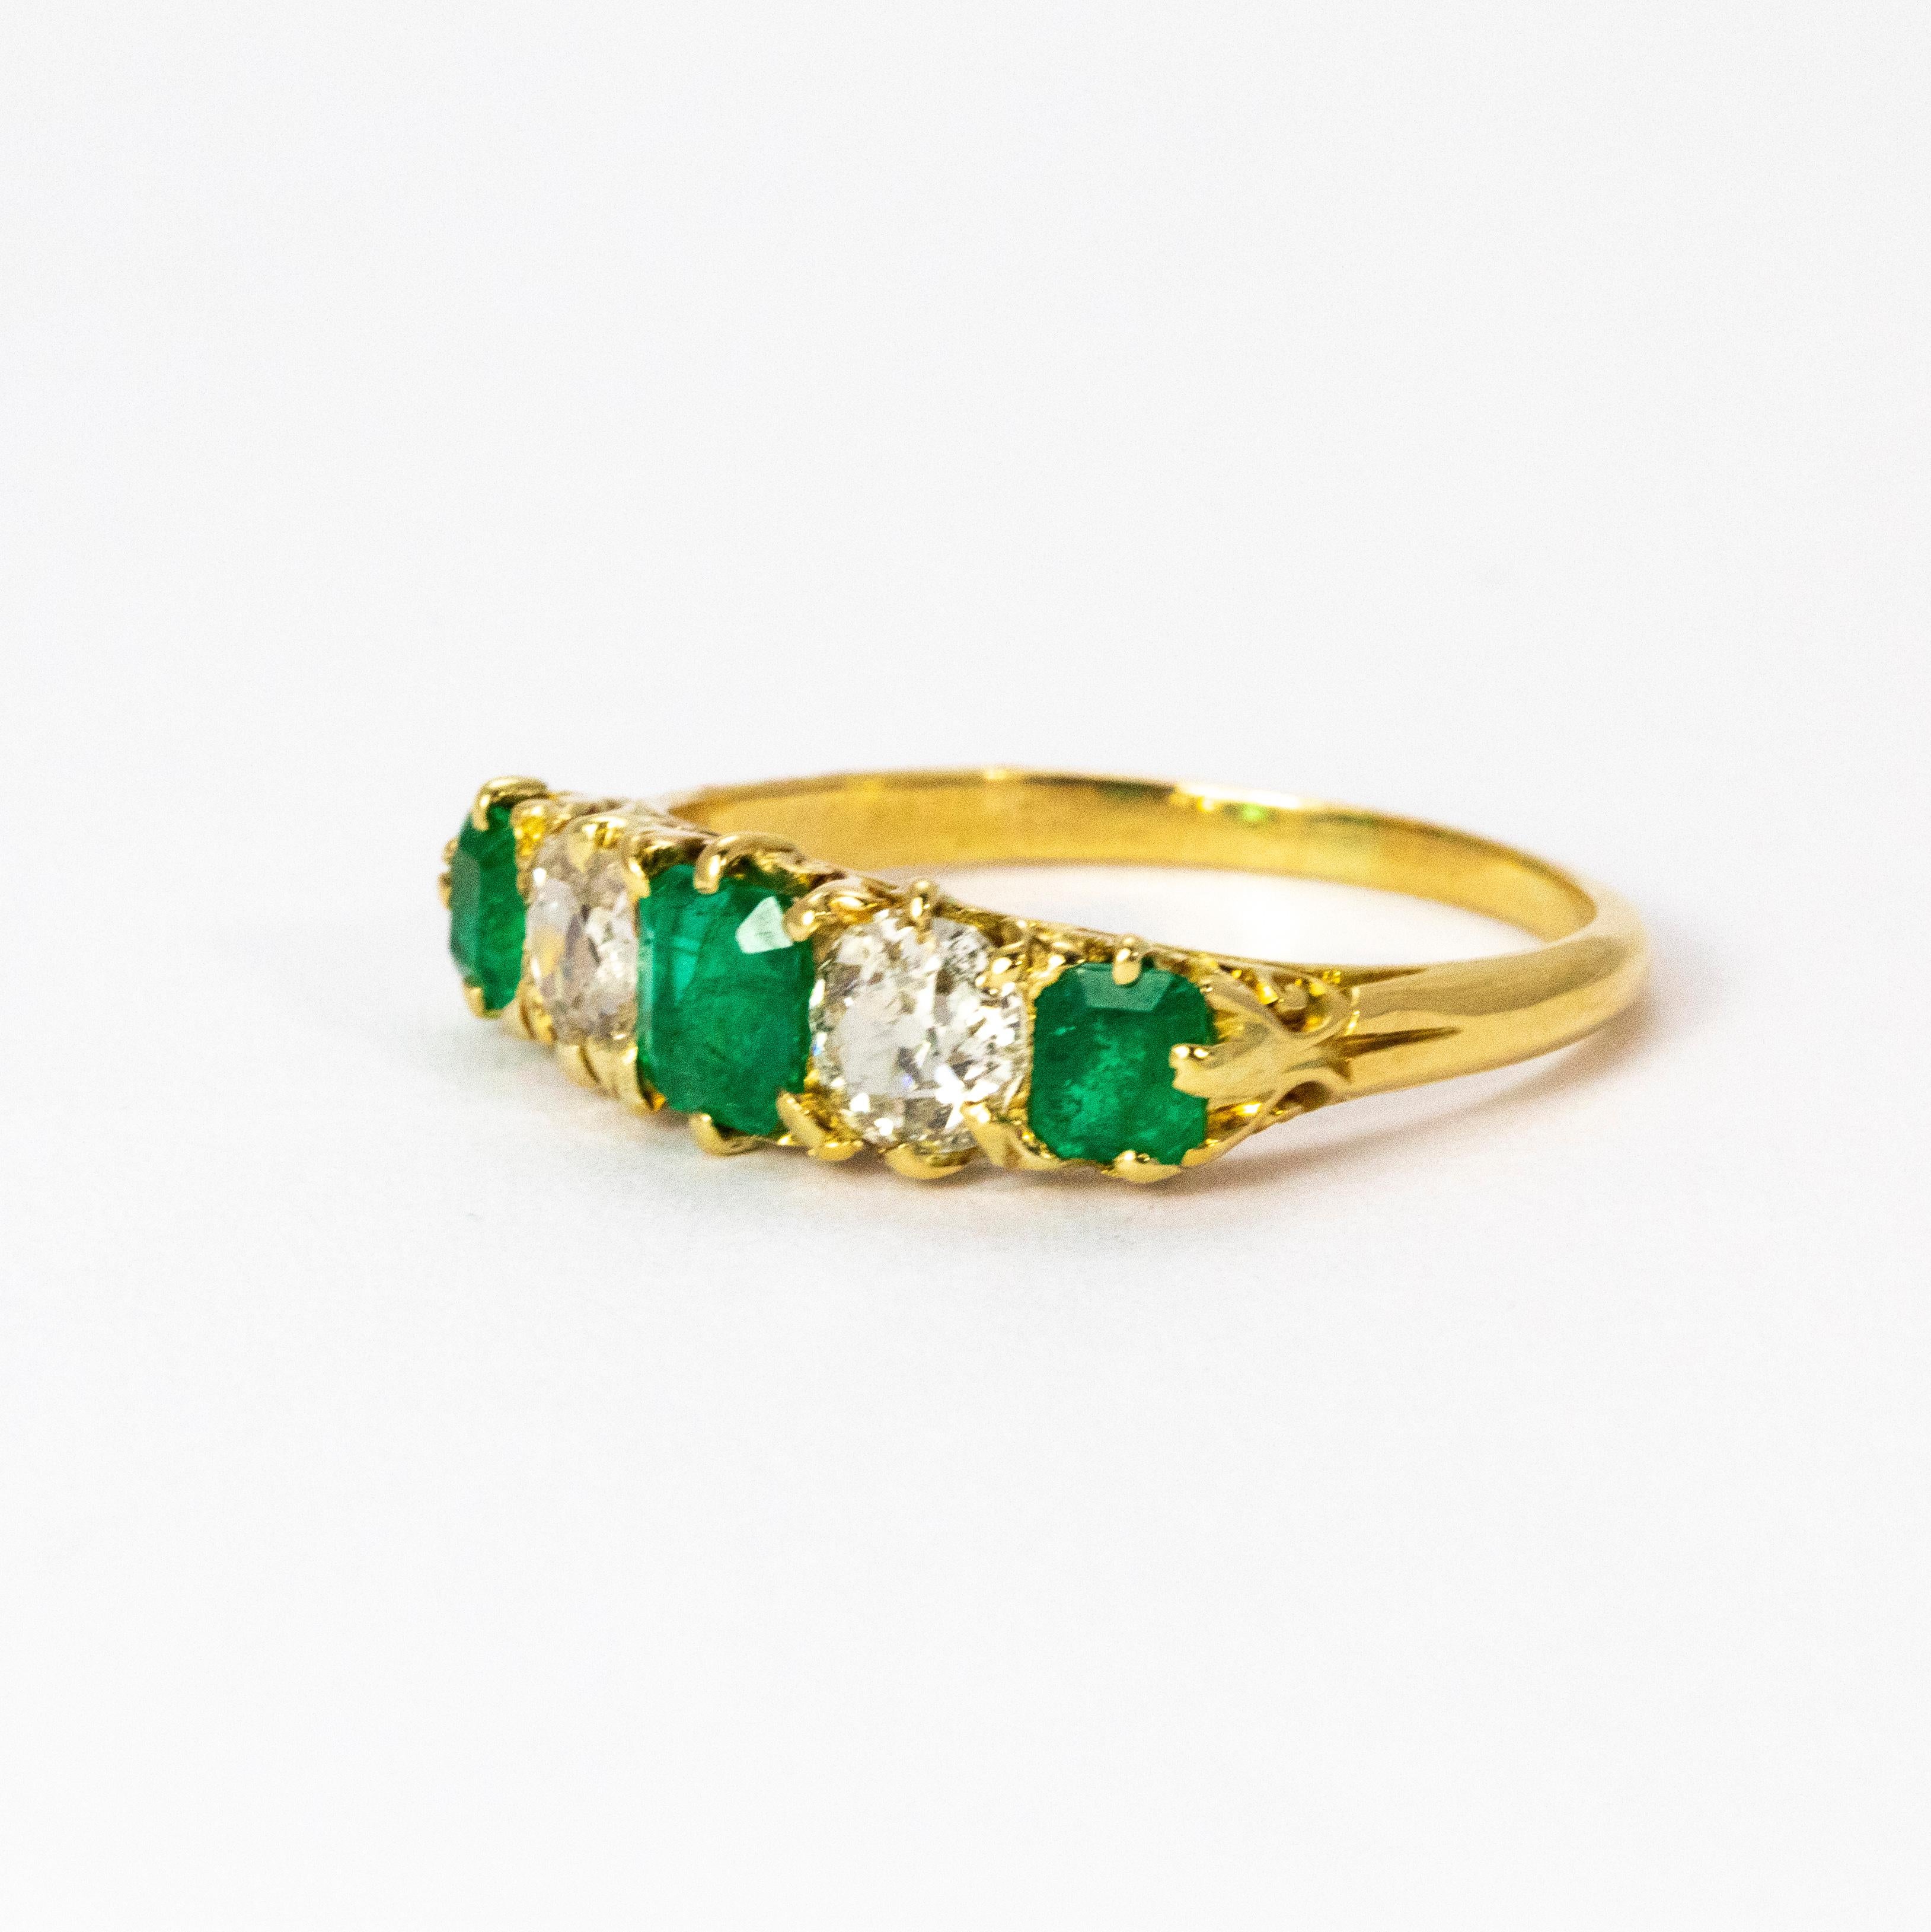 A stunning Vintage five-stone ring set with alternating white diamonds and green emeralds, all beautifully modelled in 18 karat yellow gold. Total diamond weight 1.02 carat.

Ring size: 9 or R